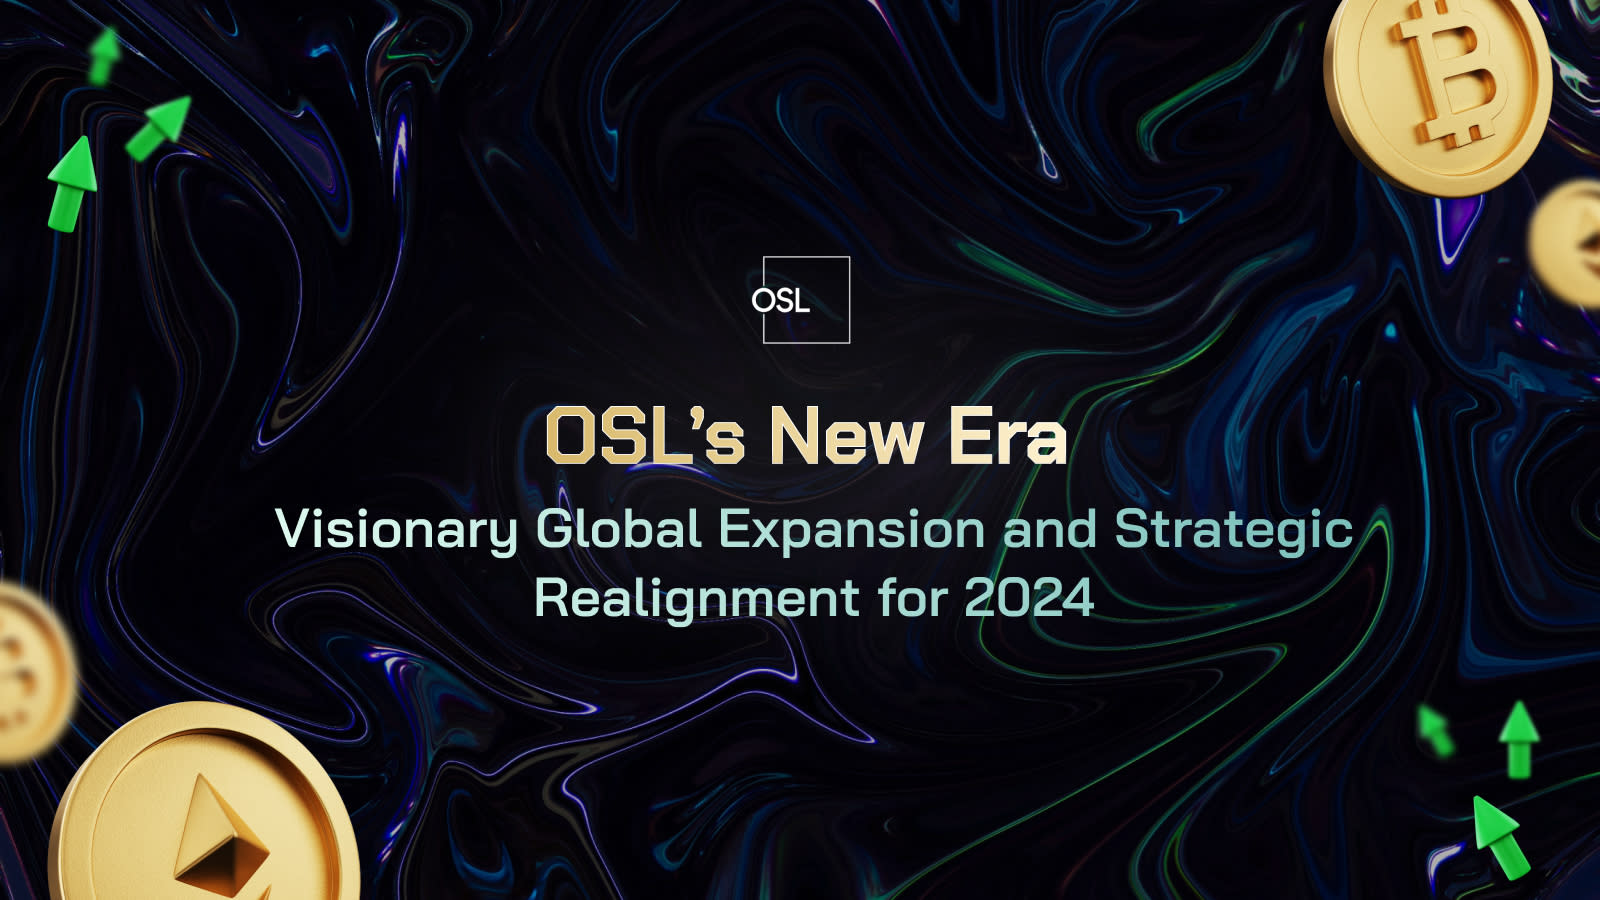 OSL's New Era: Visionary Global Expansion and Strategic Realignment for 2024